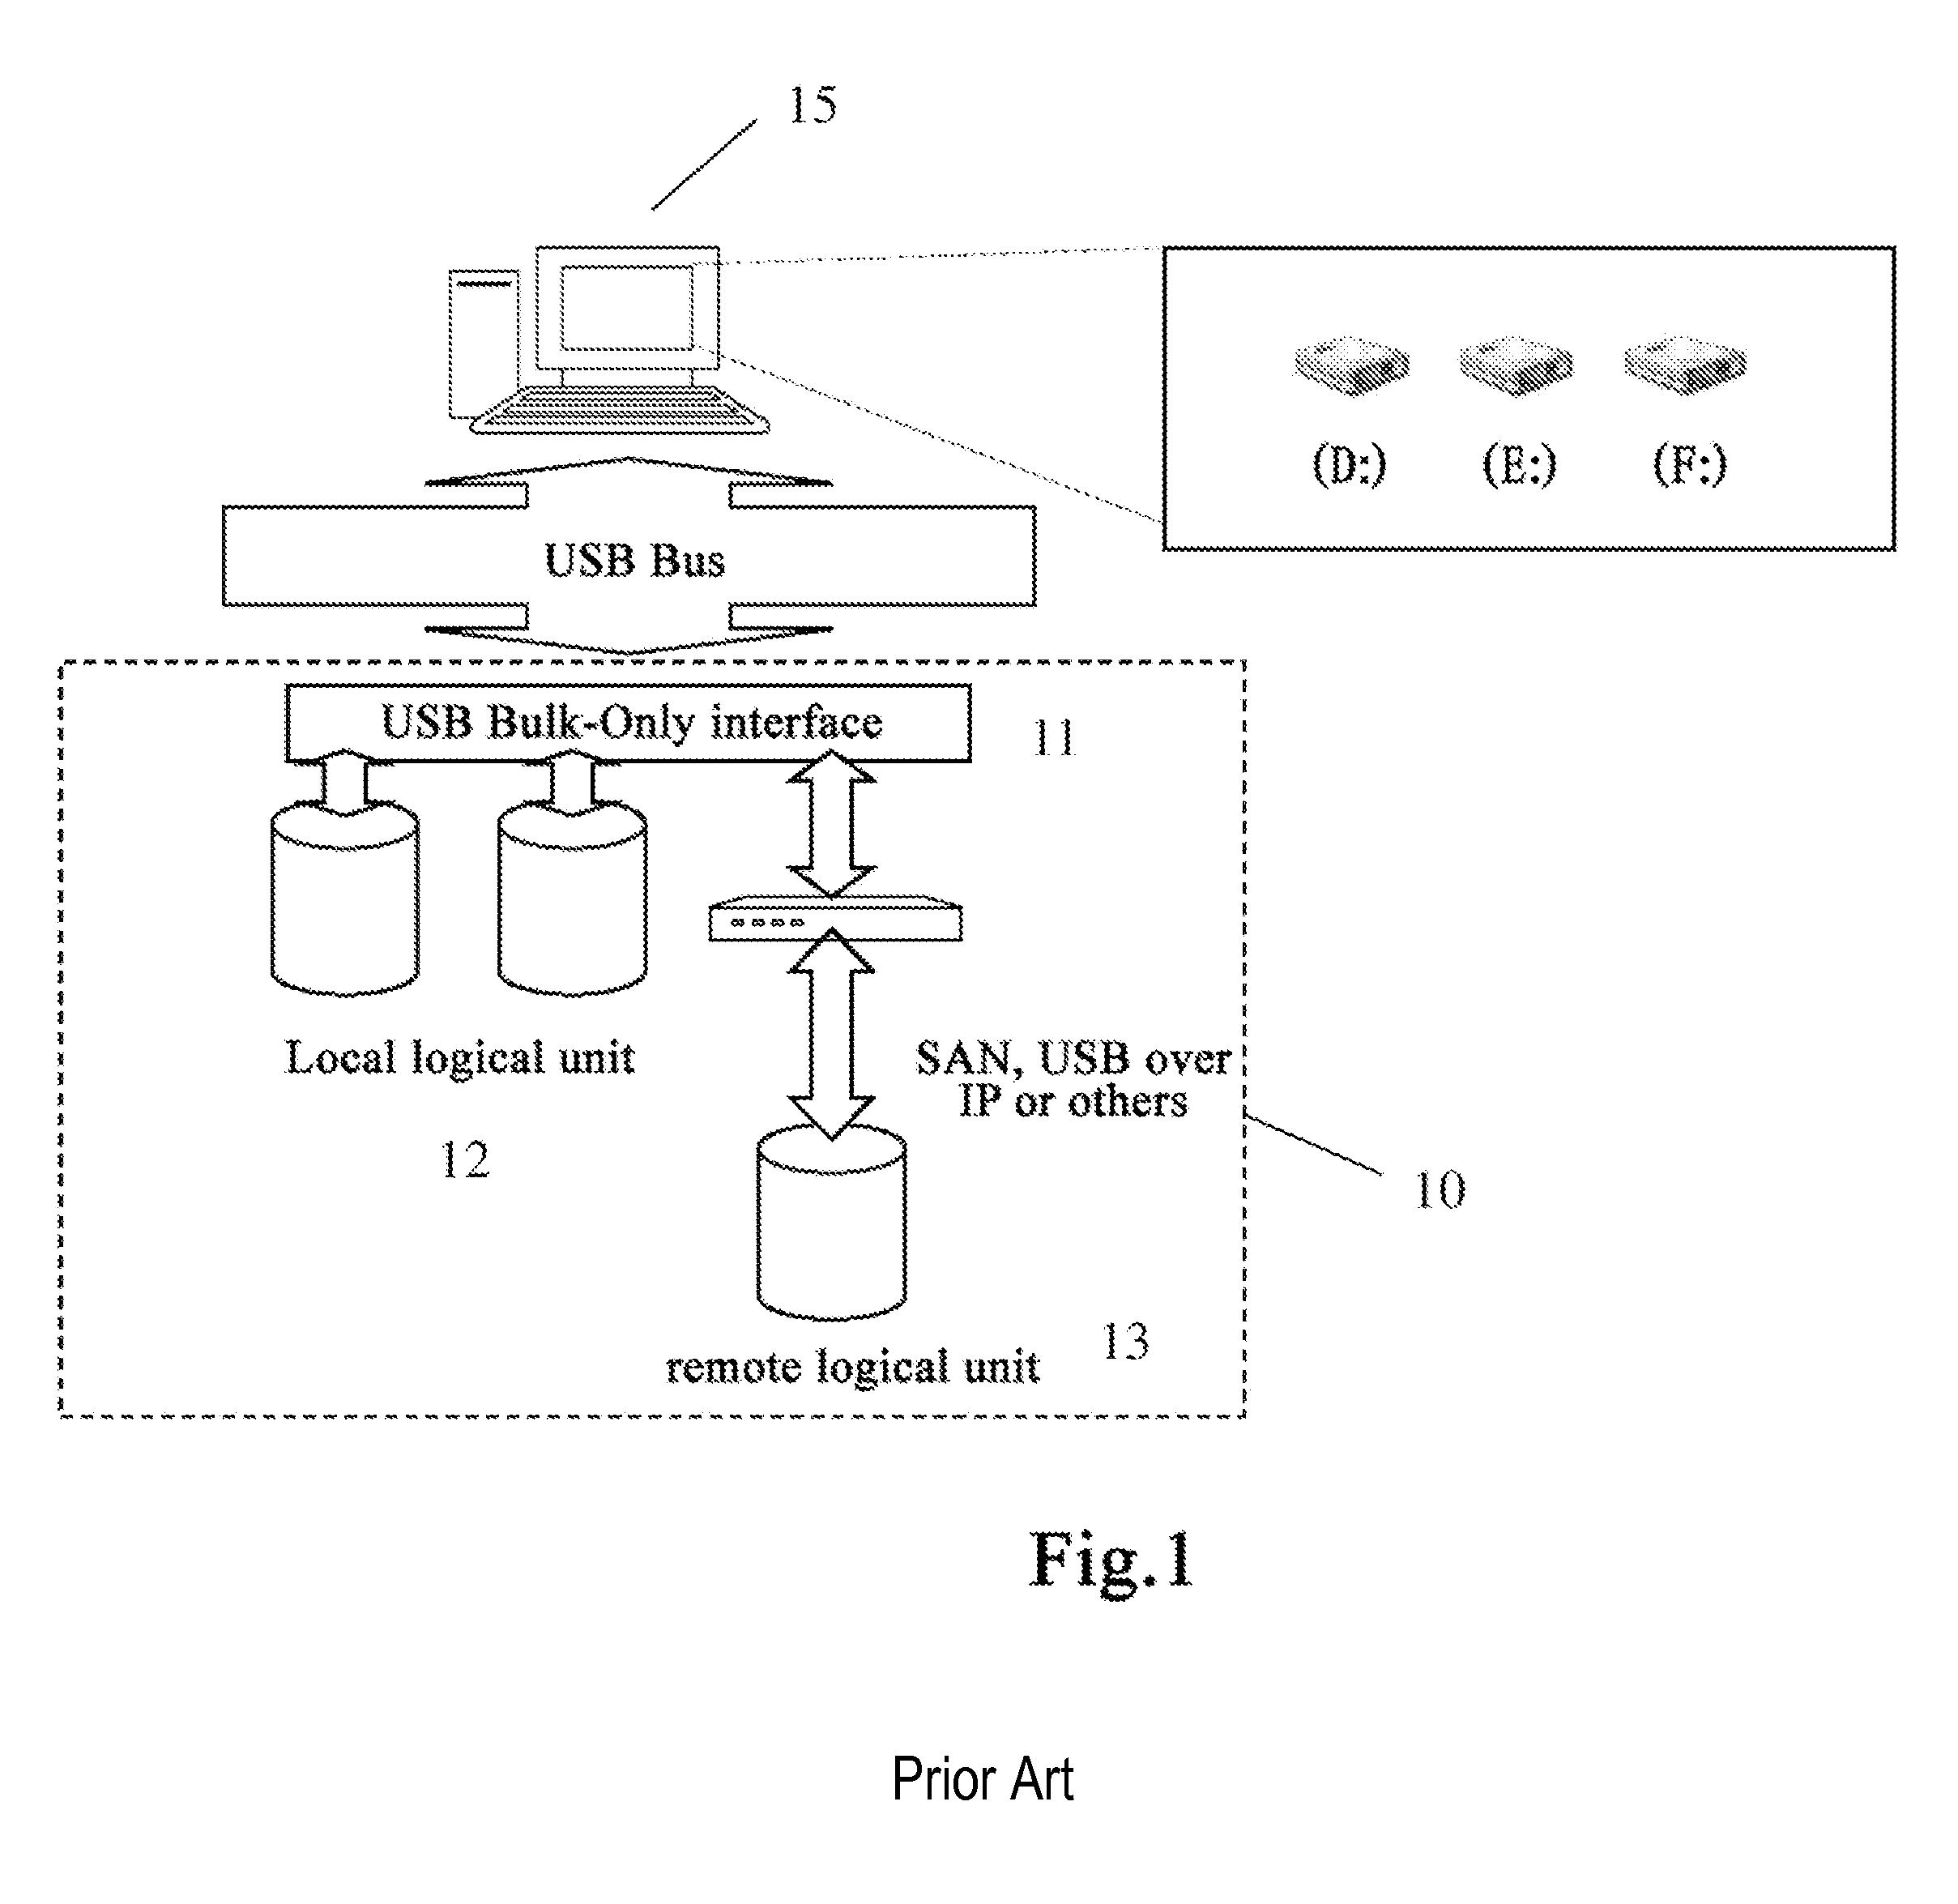 Method and system for adding or removing a logical unit of a USB mass storage device